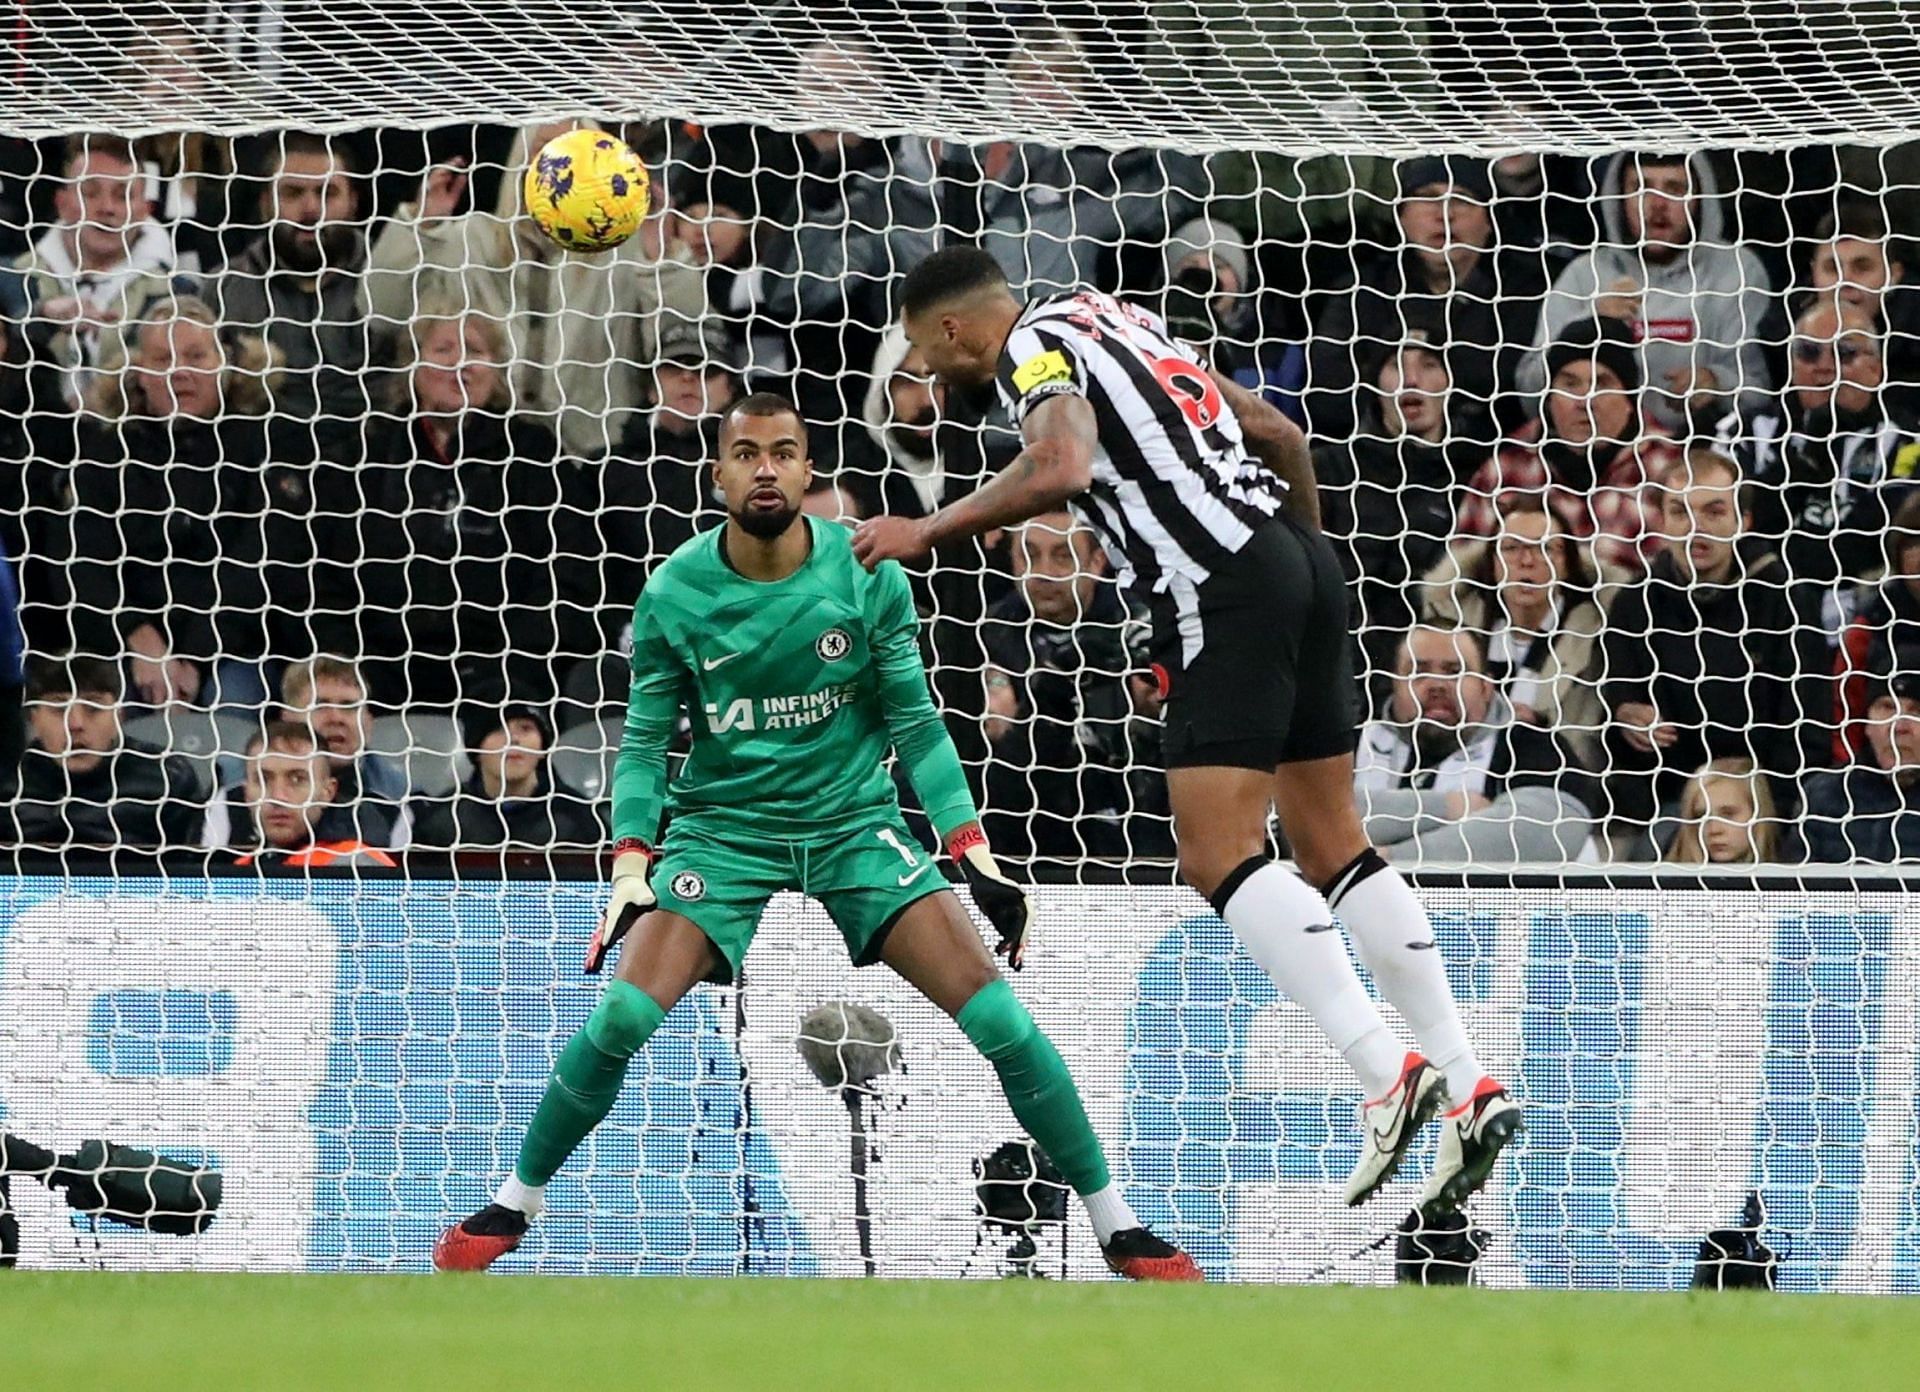 Newcastle United thrashed Chelsea 4-1 in the Premier League.